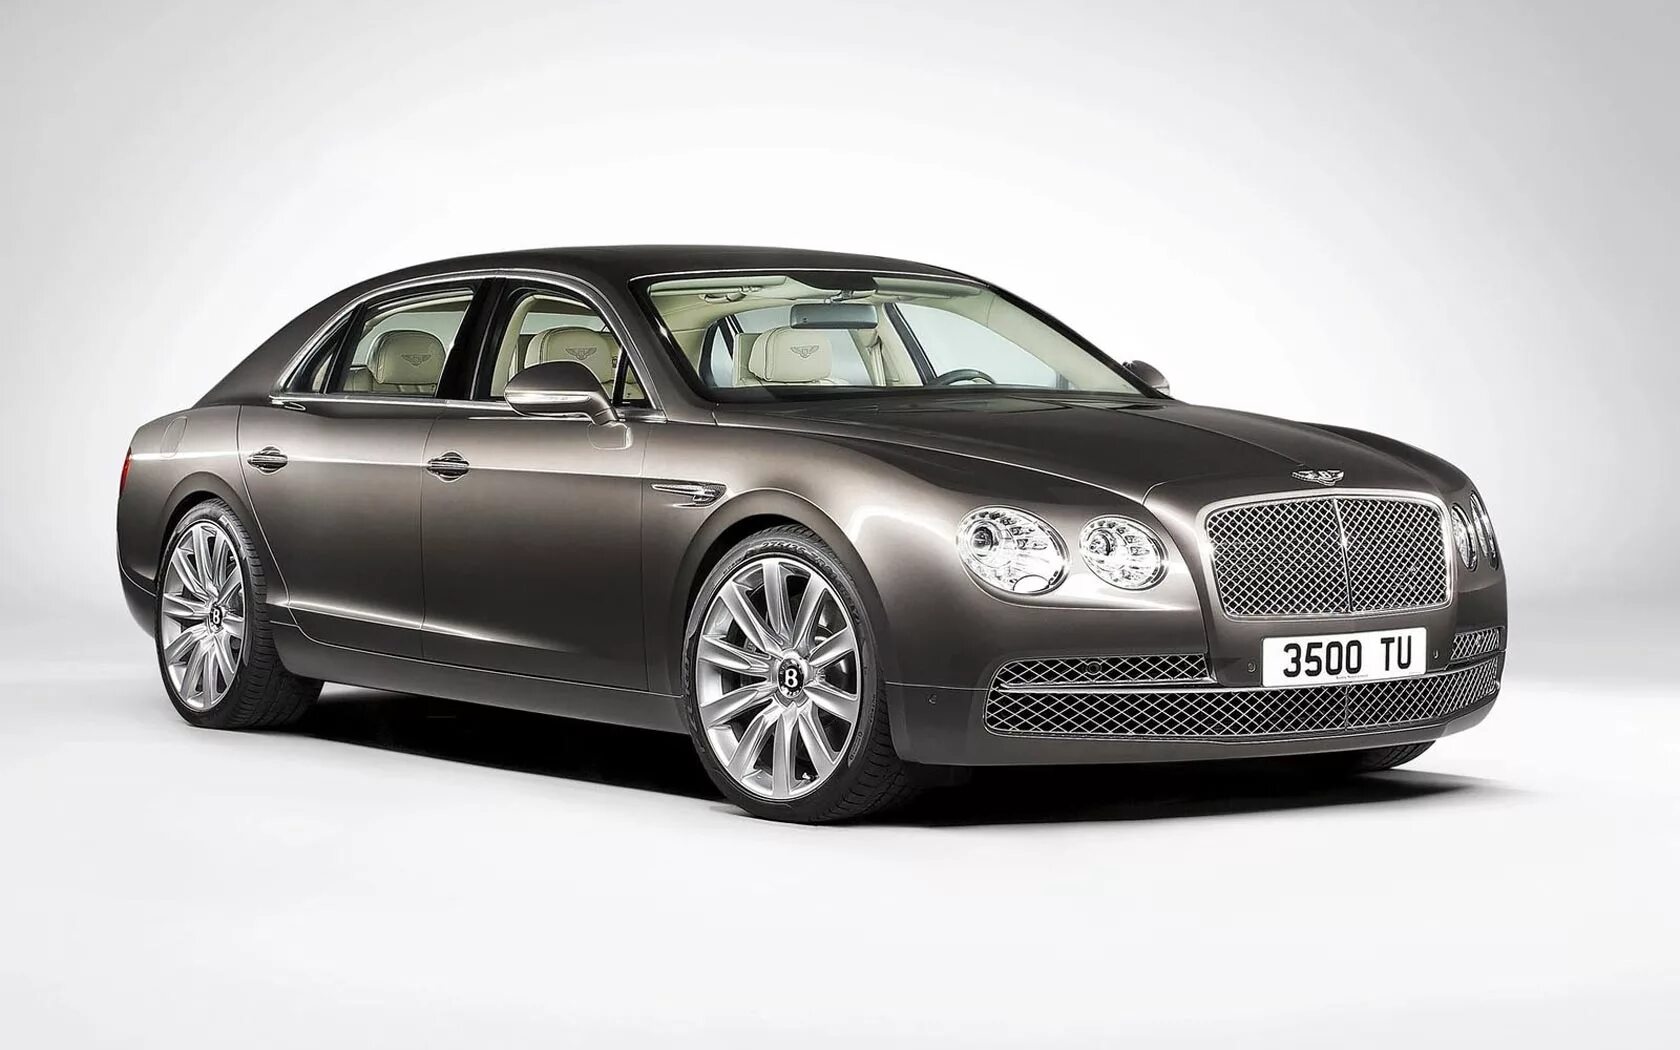 2013 Bentley Continental Flying Spur. Бентли Continental Flying Spur. Bentley Flying Spur 2010. Бентли Flying Spur 2014.